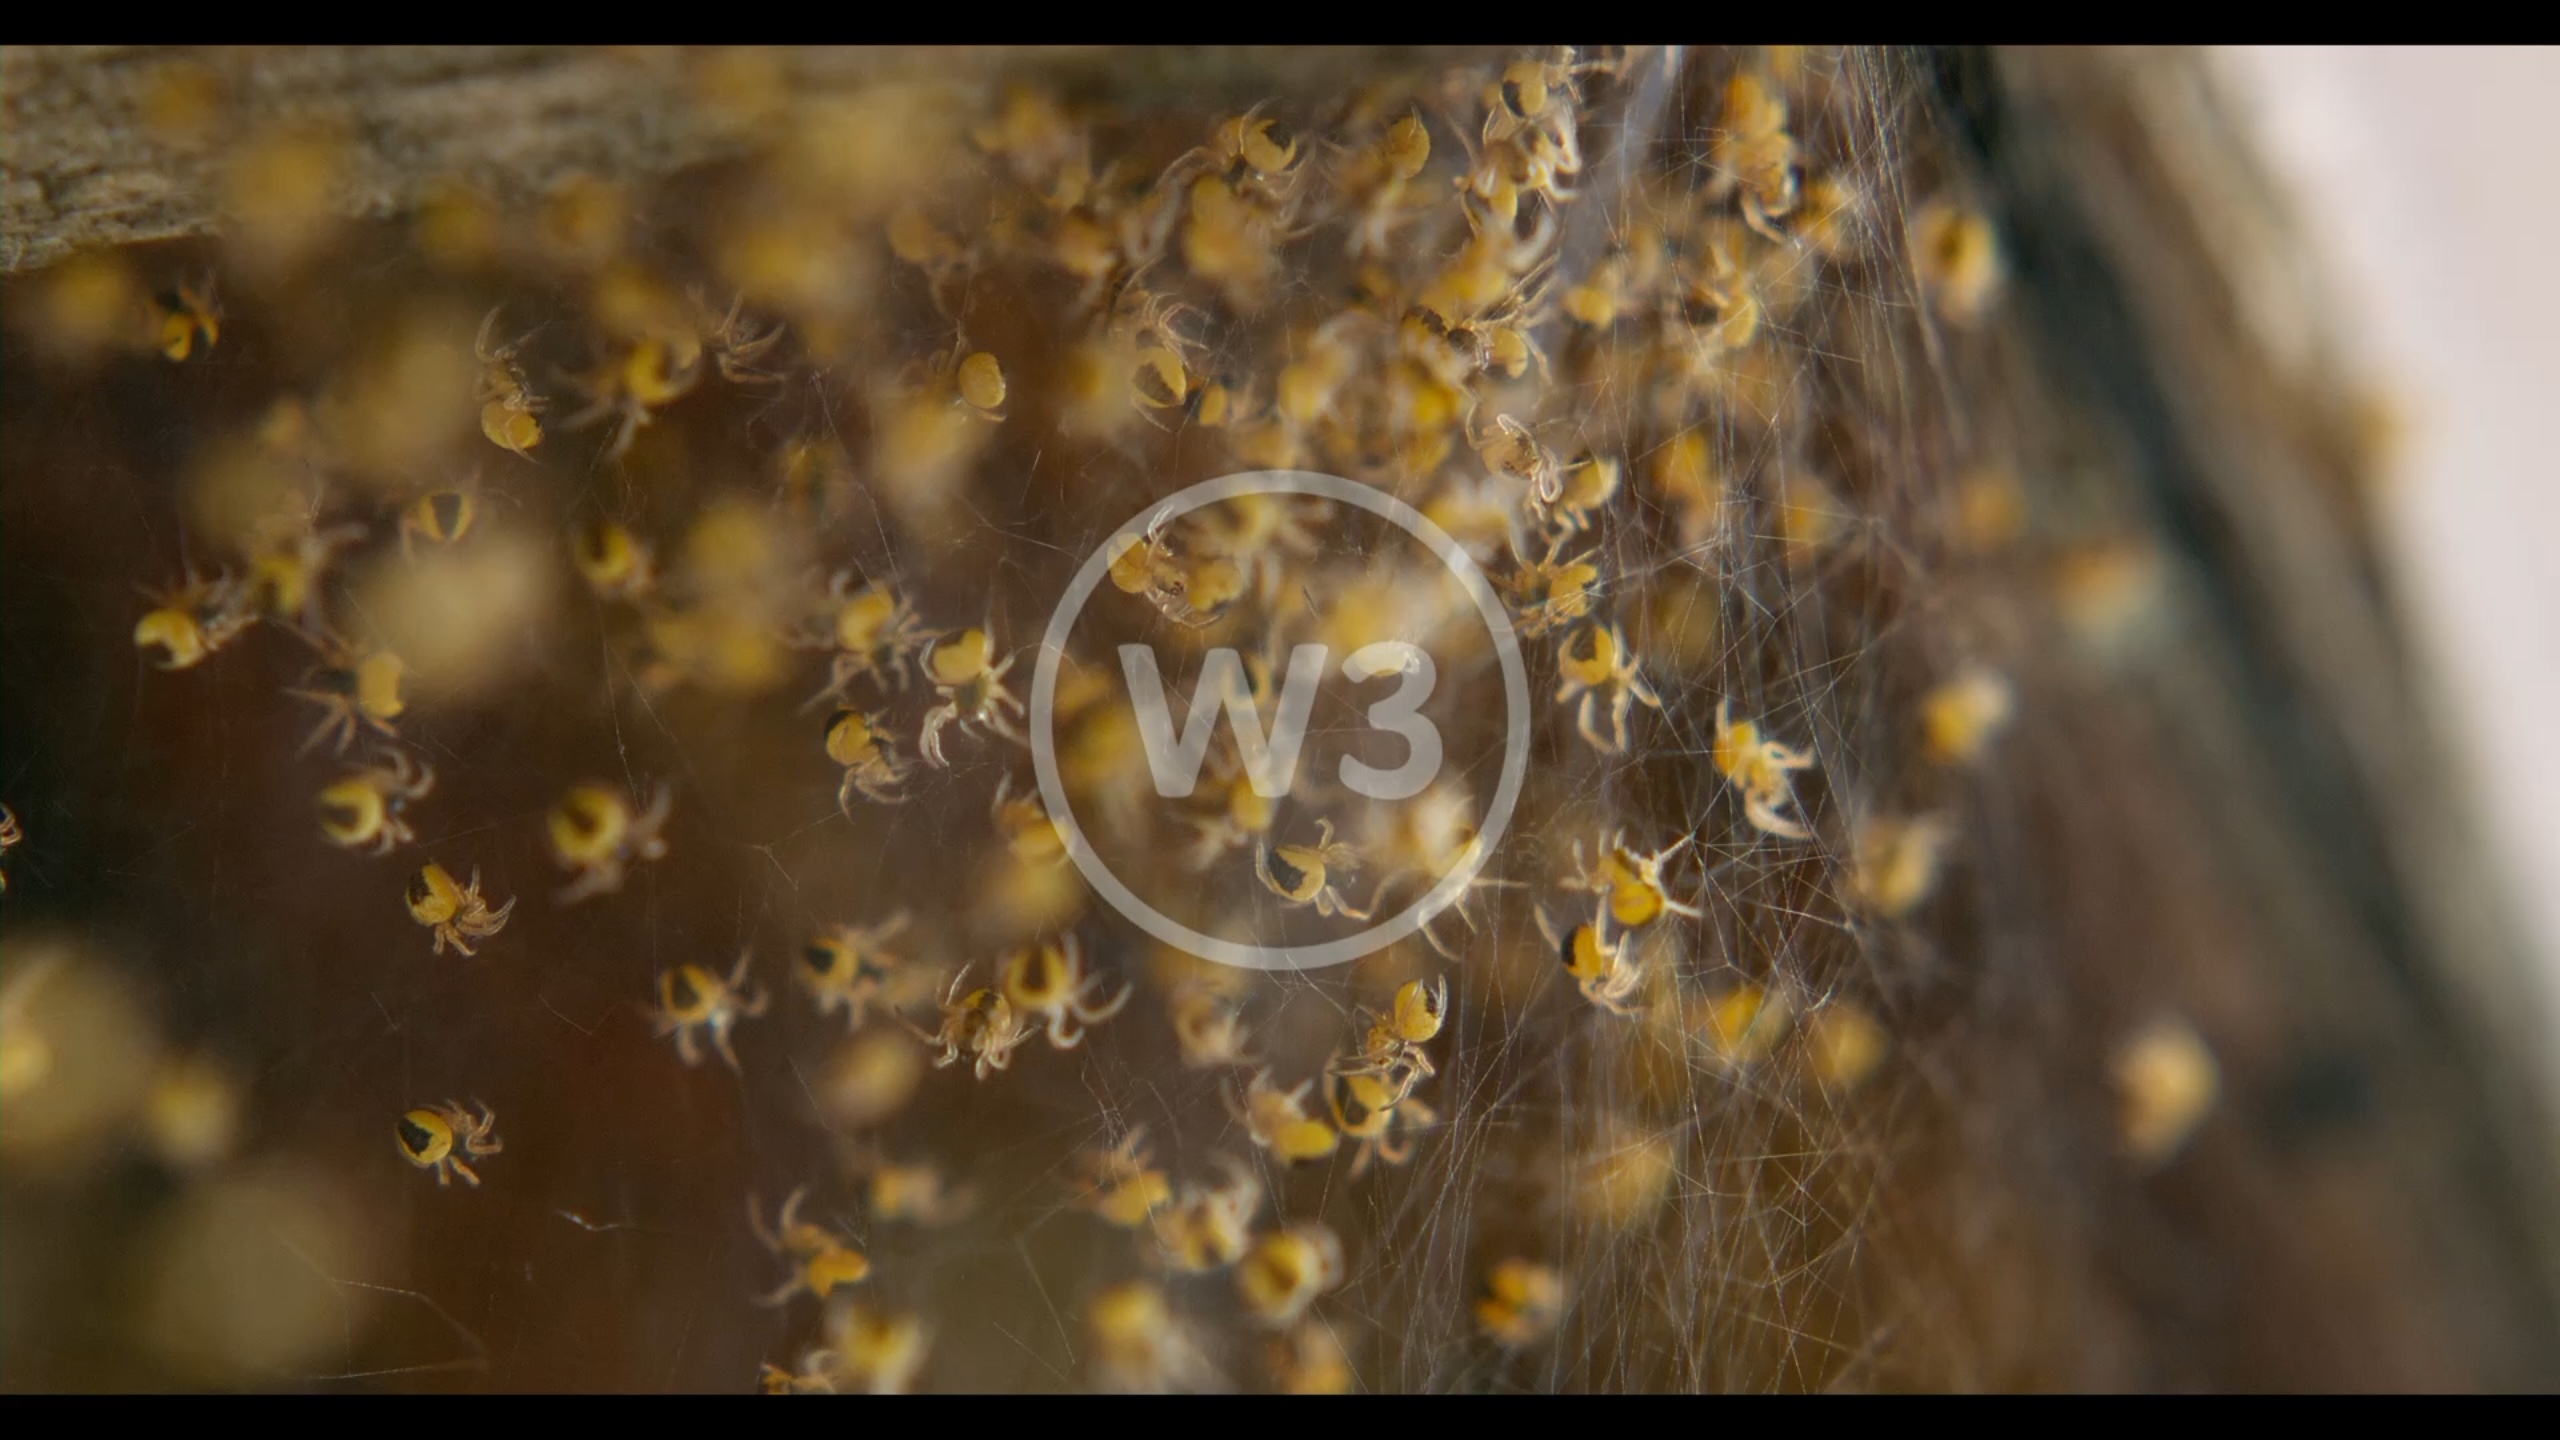 w3-001000016-swarm-of-baby-spiders-in-web-slow-motion thumbnail image